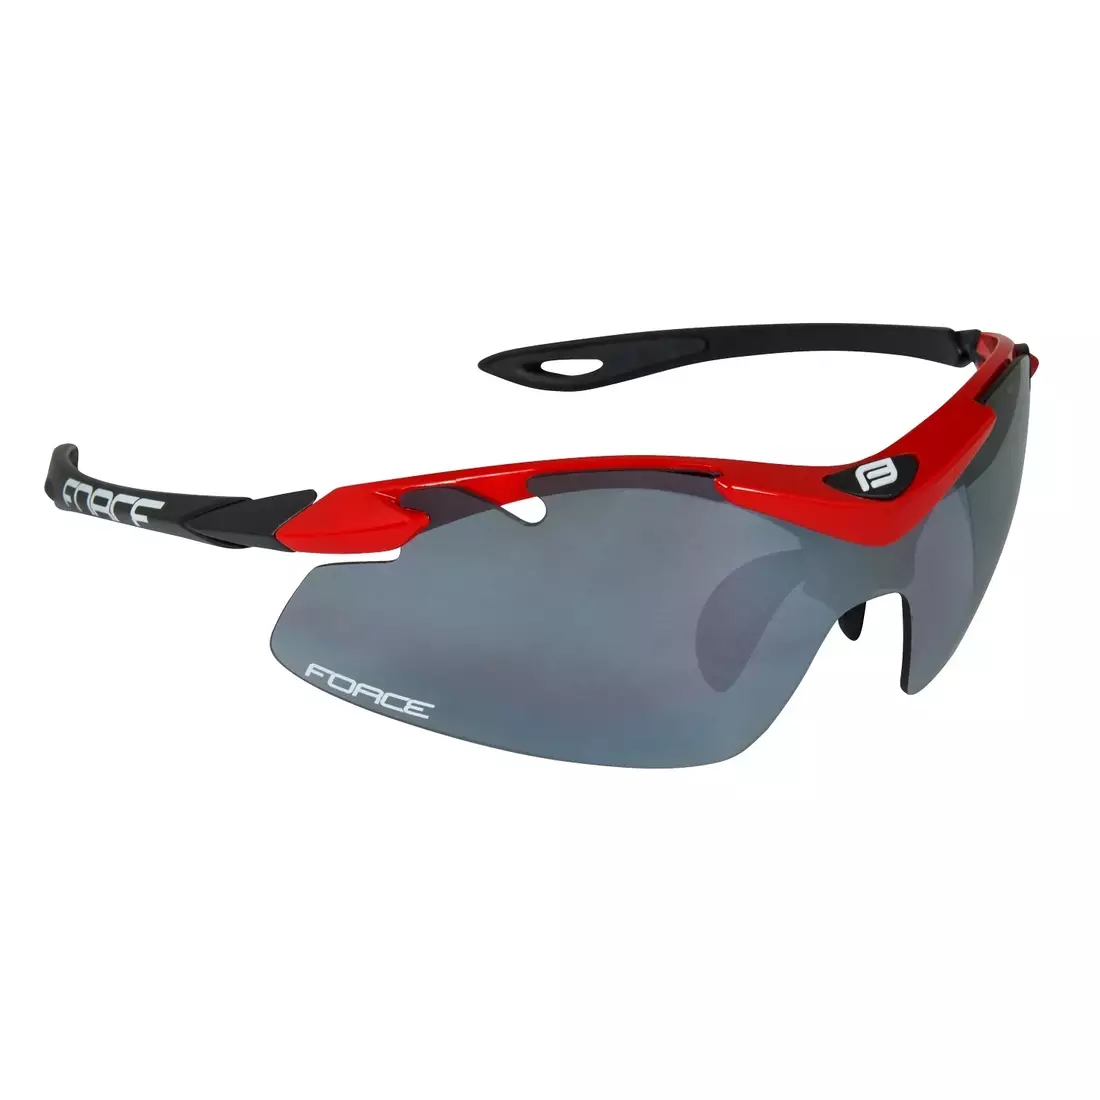 FORCE DUKE glasses with interchangeable lenses red and black 91023